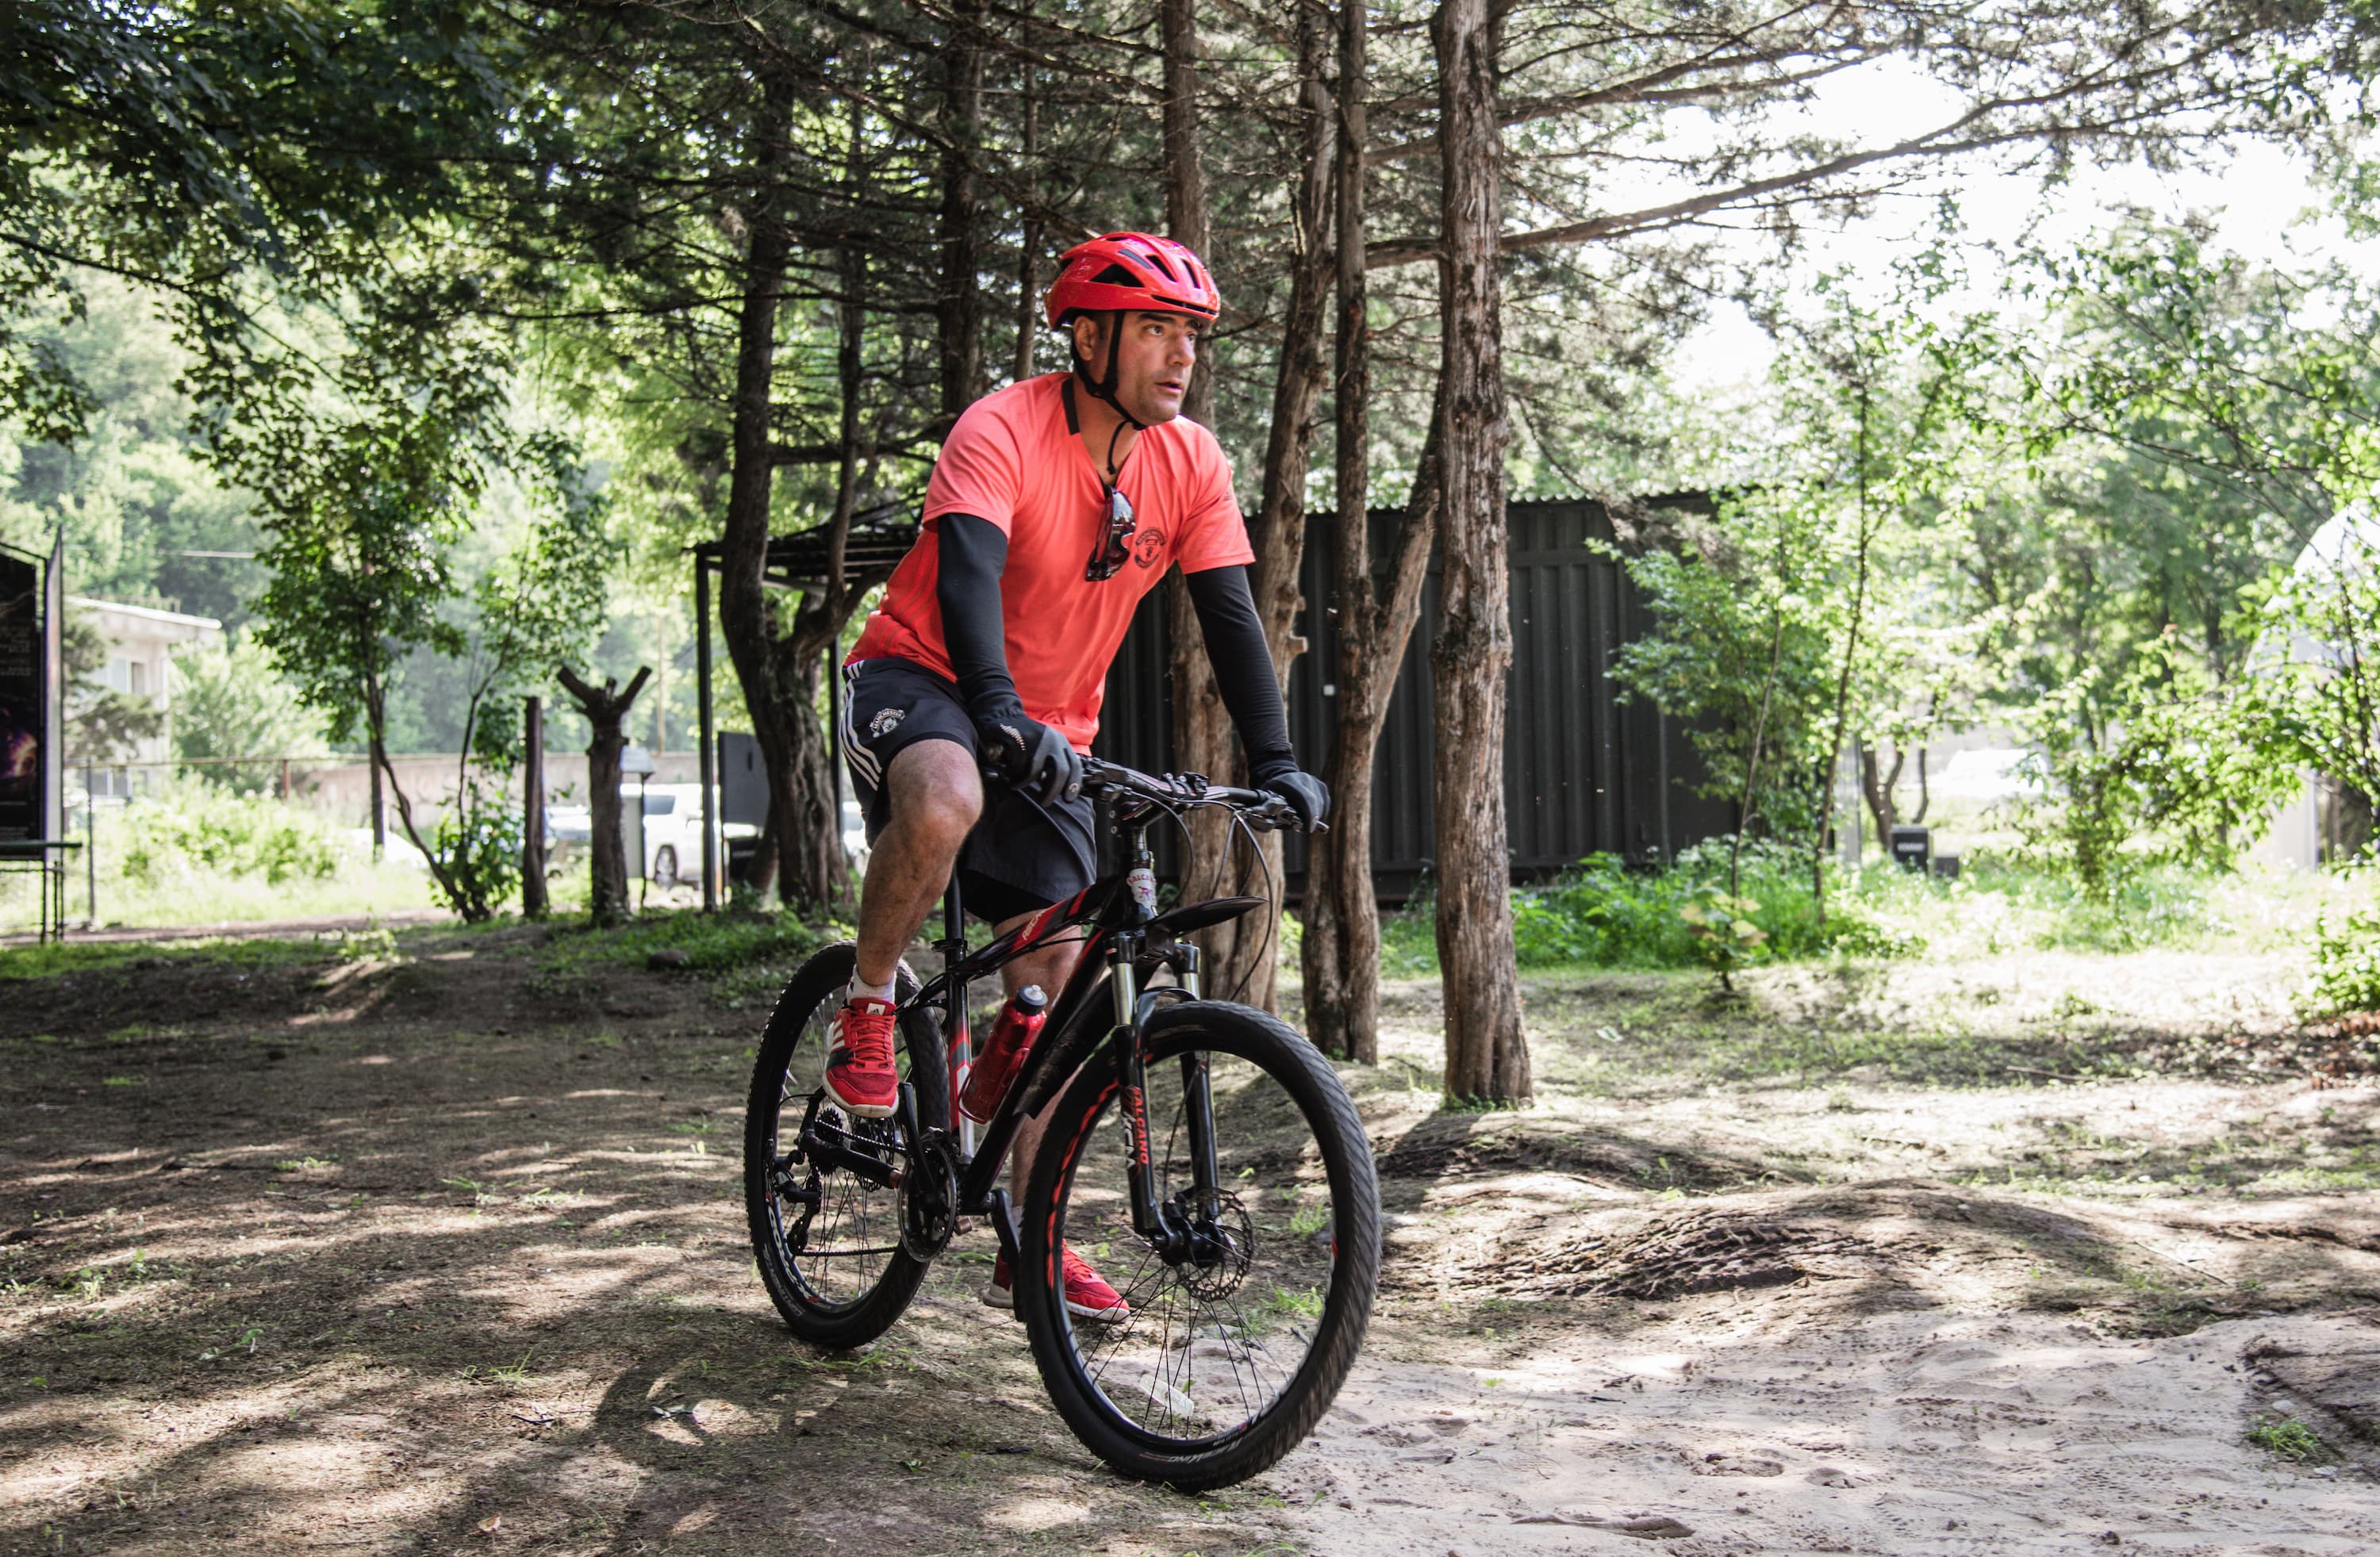 Large-scale cycling tournament Ascend Armenia Ultra Distance Bikepacking Race 2023 was held in Armenia